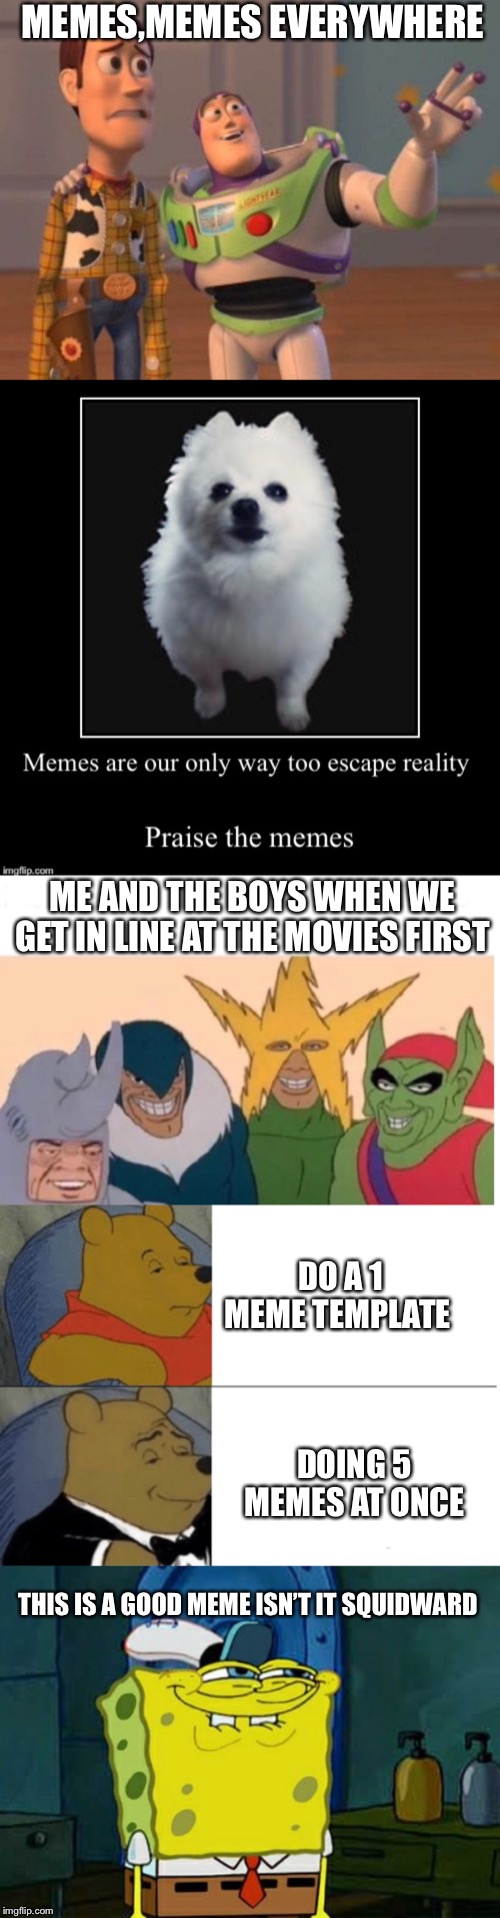 5 memes at once | MEMES,MEMES EVERYWHERE; ME AND THE BOYS WHEN WE GET IN LINE AT THE MOVIES FIRST; DO A 1 MEME TEMPLATE; DOING 5 MEMES AT ONCE; THIS IS A GOOD MEME ISN’T IT SQUIDWARD | image tagged in x x everywhere,gabe the dog,me and the boys,tuxedo winnie the pooh,dont you squidward,memes | made w/ Imgflip meme maker